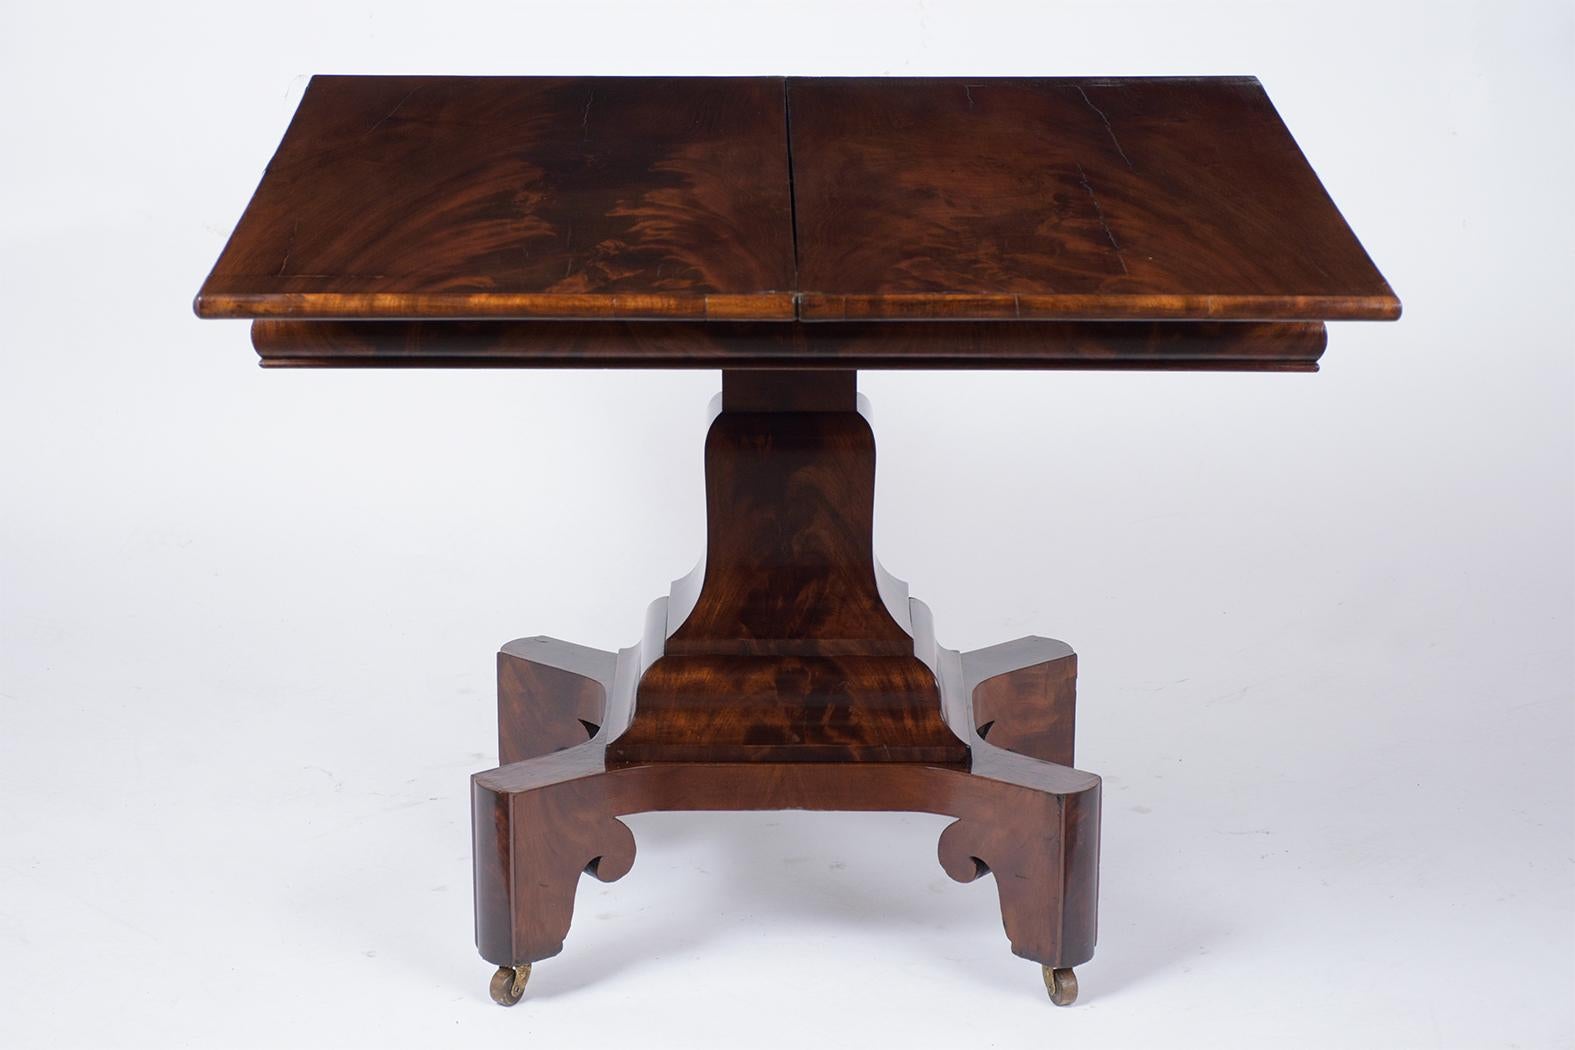 Hand-Crafted Empire Card Table